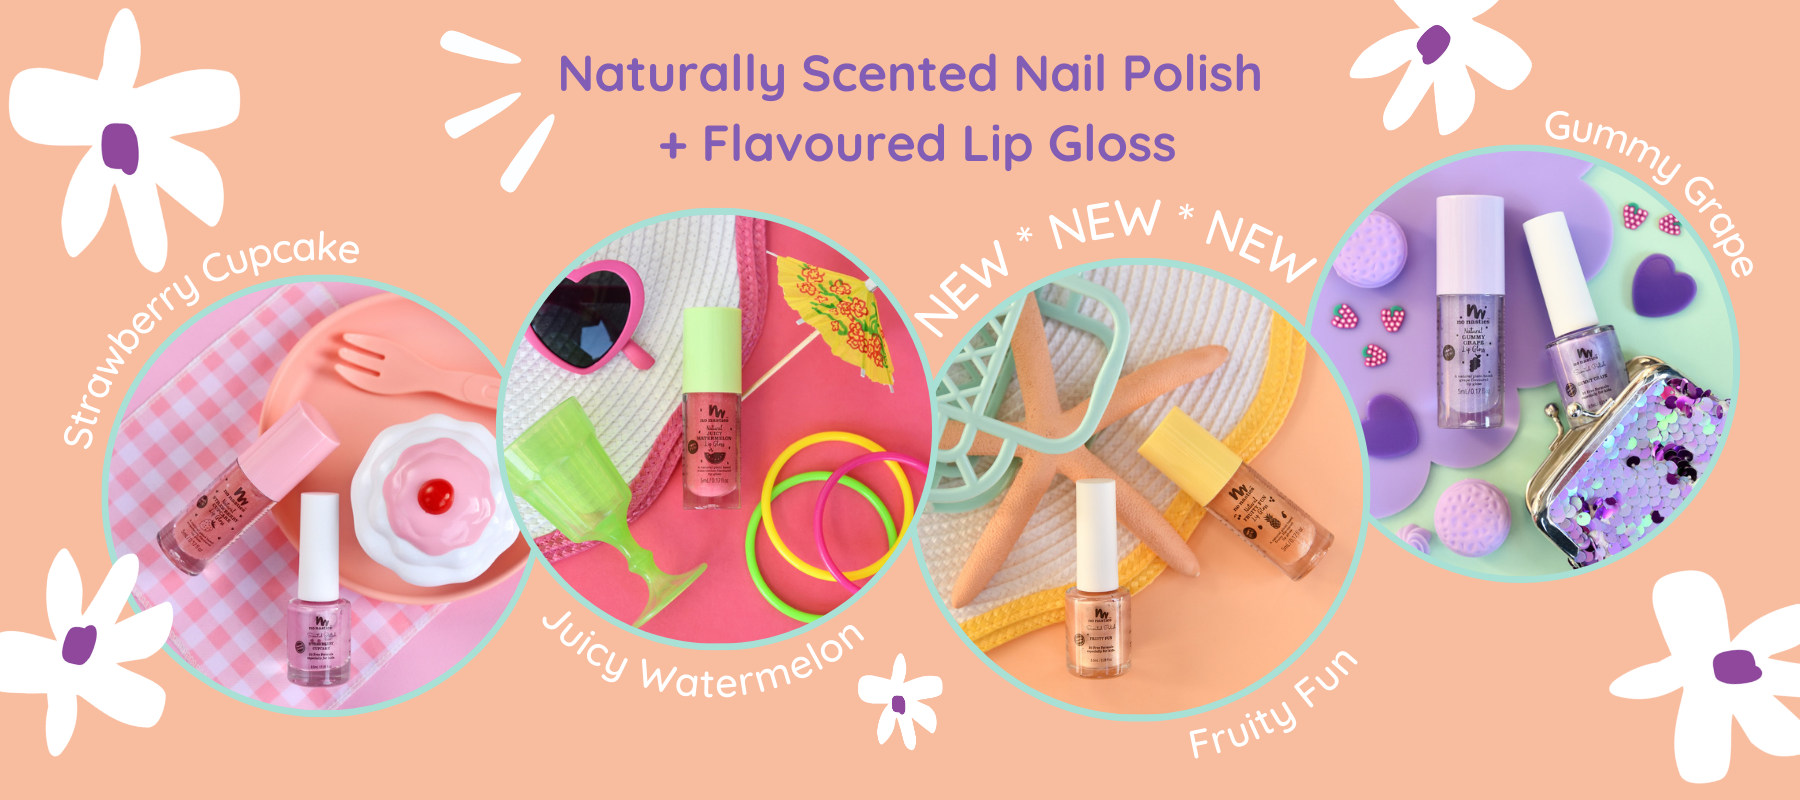 Range of natural kids lip glosses and scented nail polishes on peach background